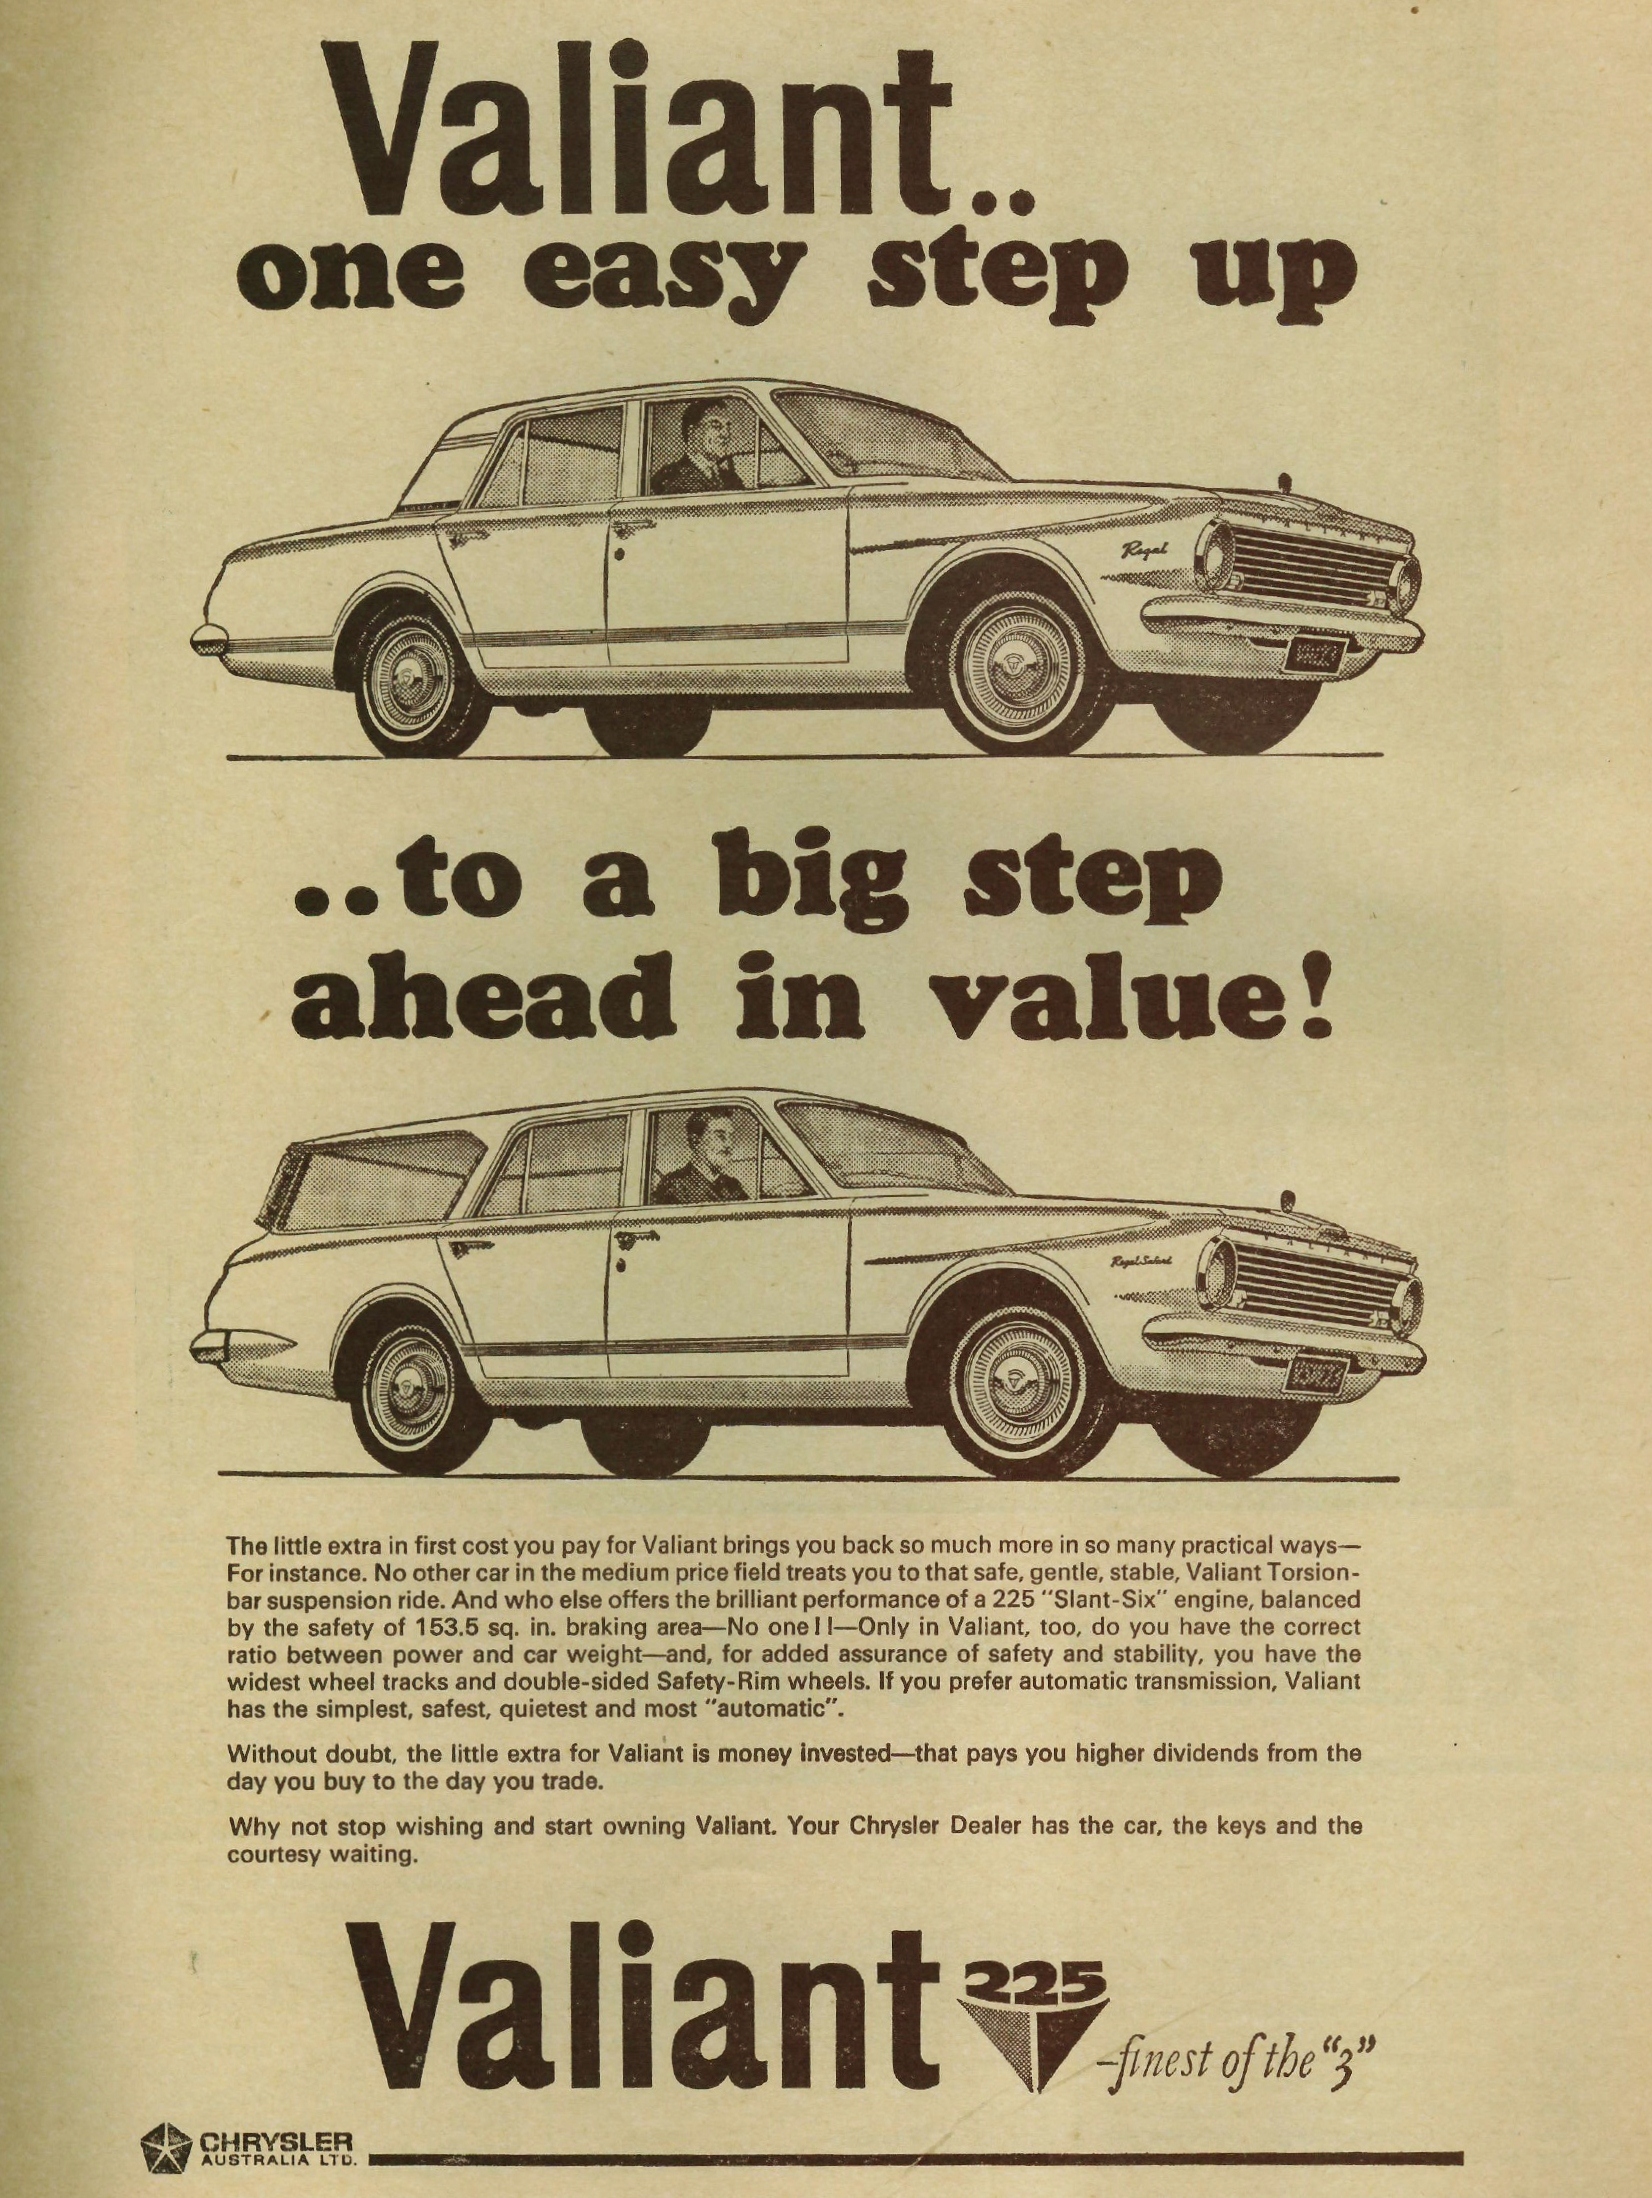 an ad for valeant automobiles in a vintage advertit